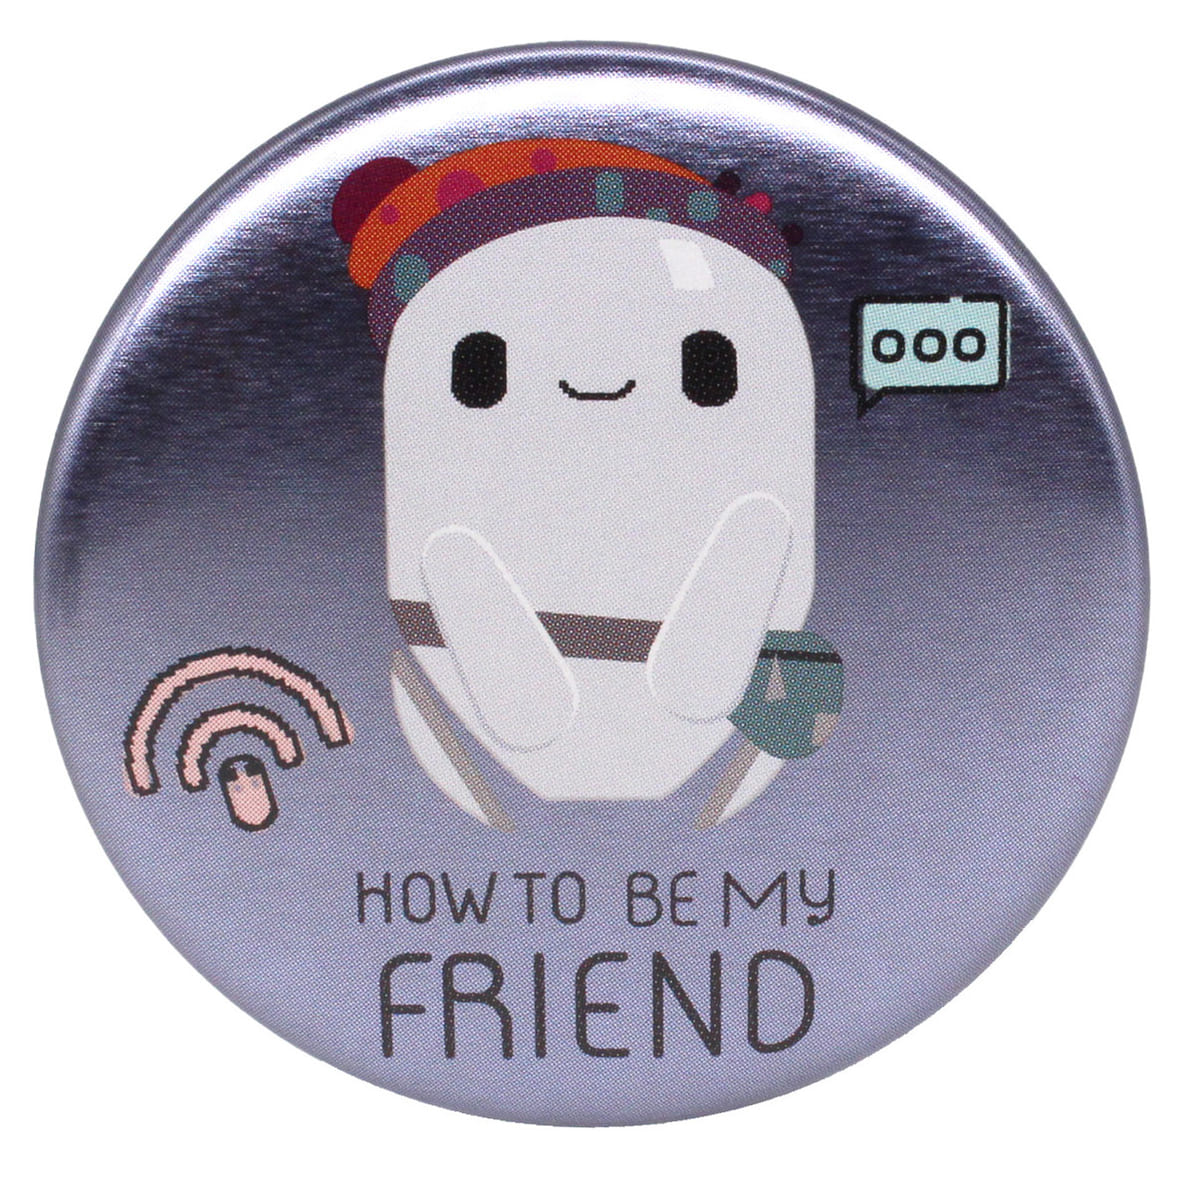 HOW TO BE MY FRIEND